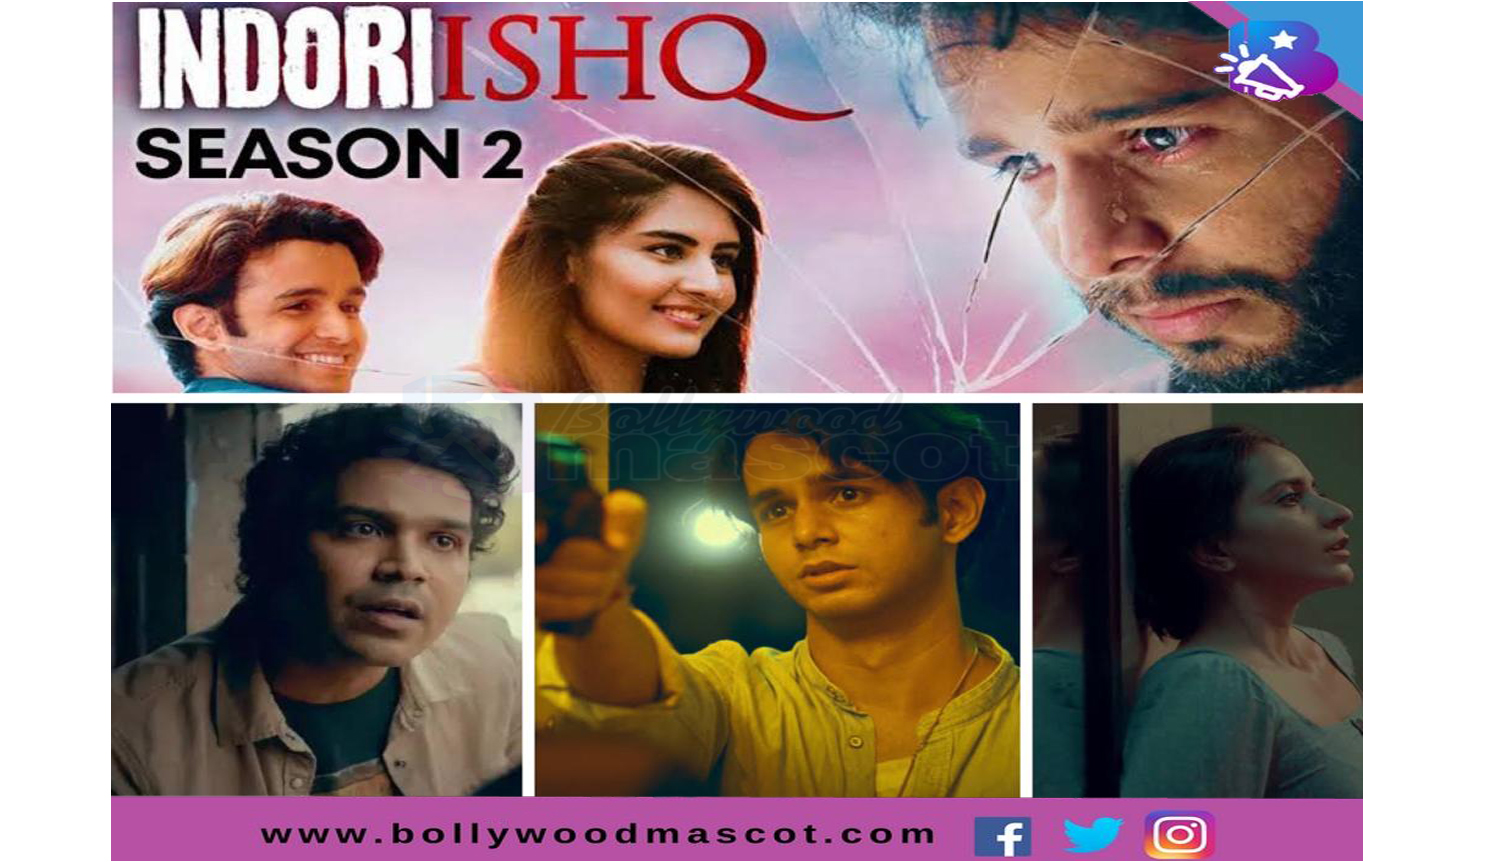 Indori Ishq Season 2 Release Date And Time, New Cast, Full Story, Trailer on MX Player